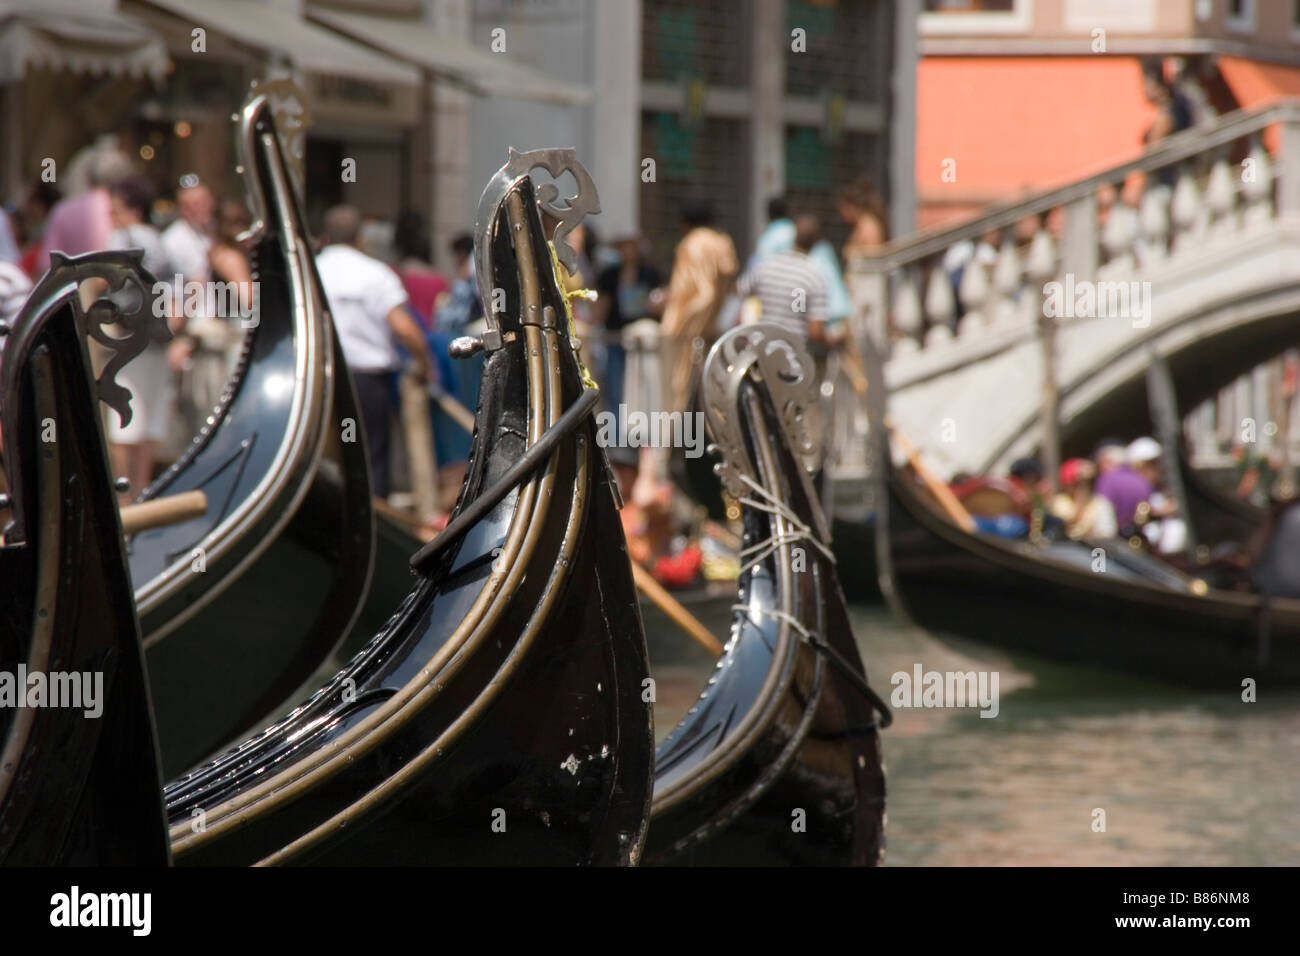 Venice Italy gondolas wait for passengers before gondoliers embark on tours of the city's famous canals. Stock Photo